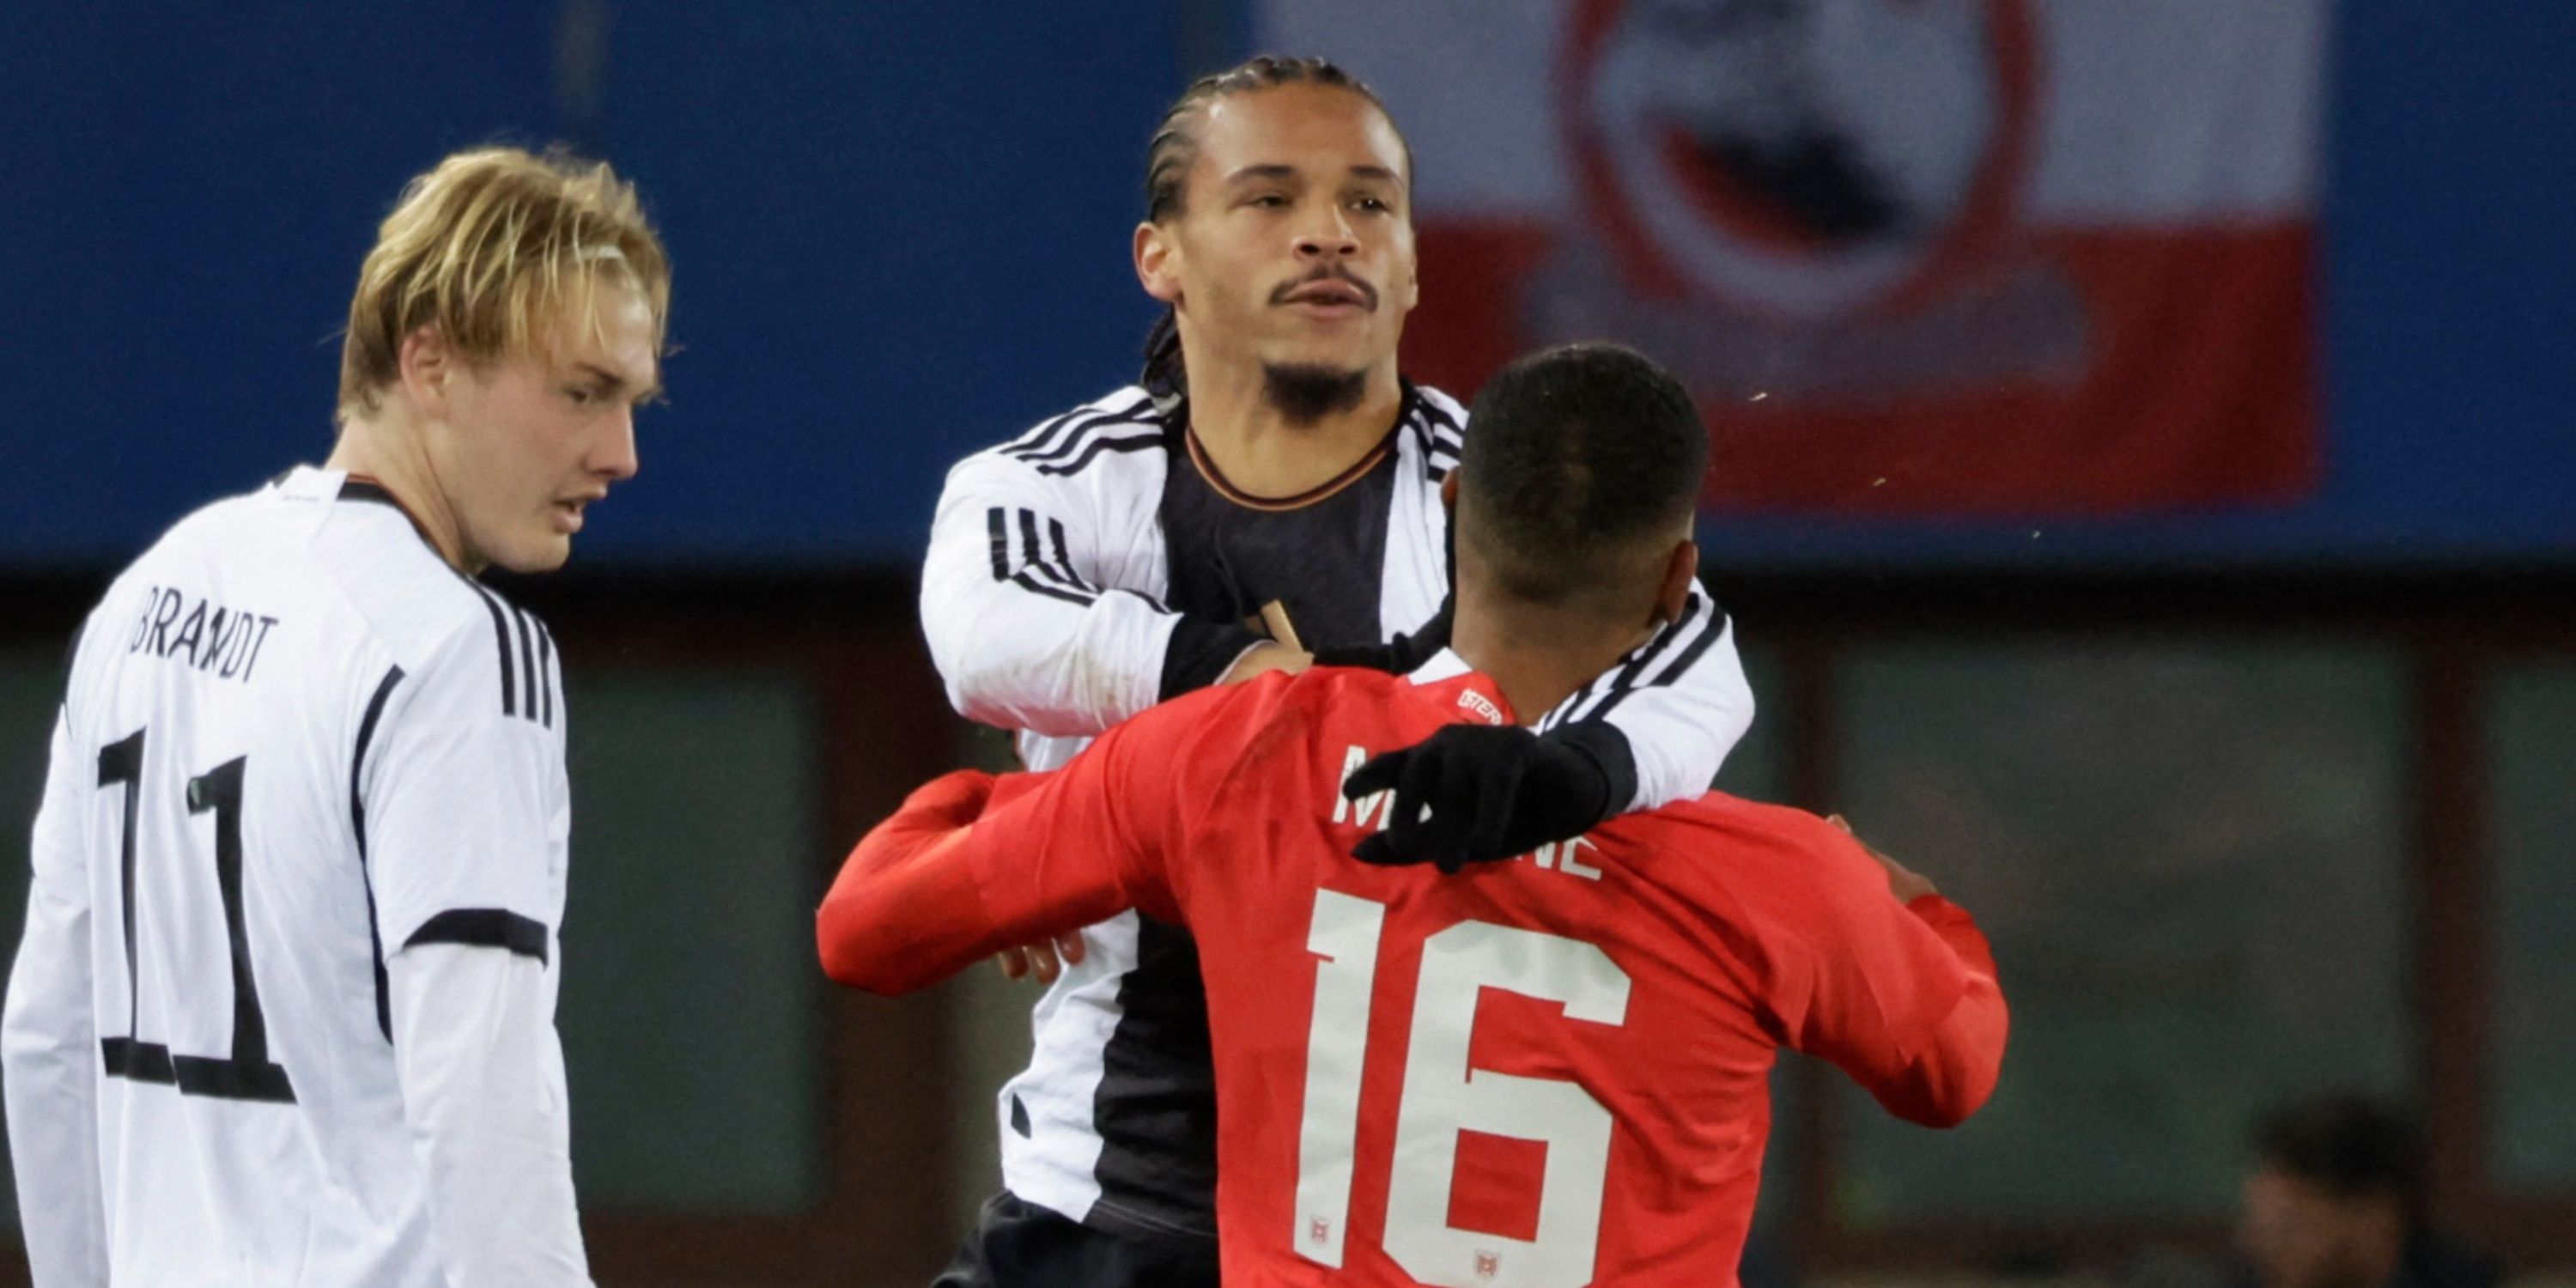 Germany's Leroy Sane clashes with Austria's Philip Mwene before he is shown a red card